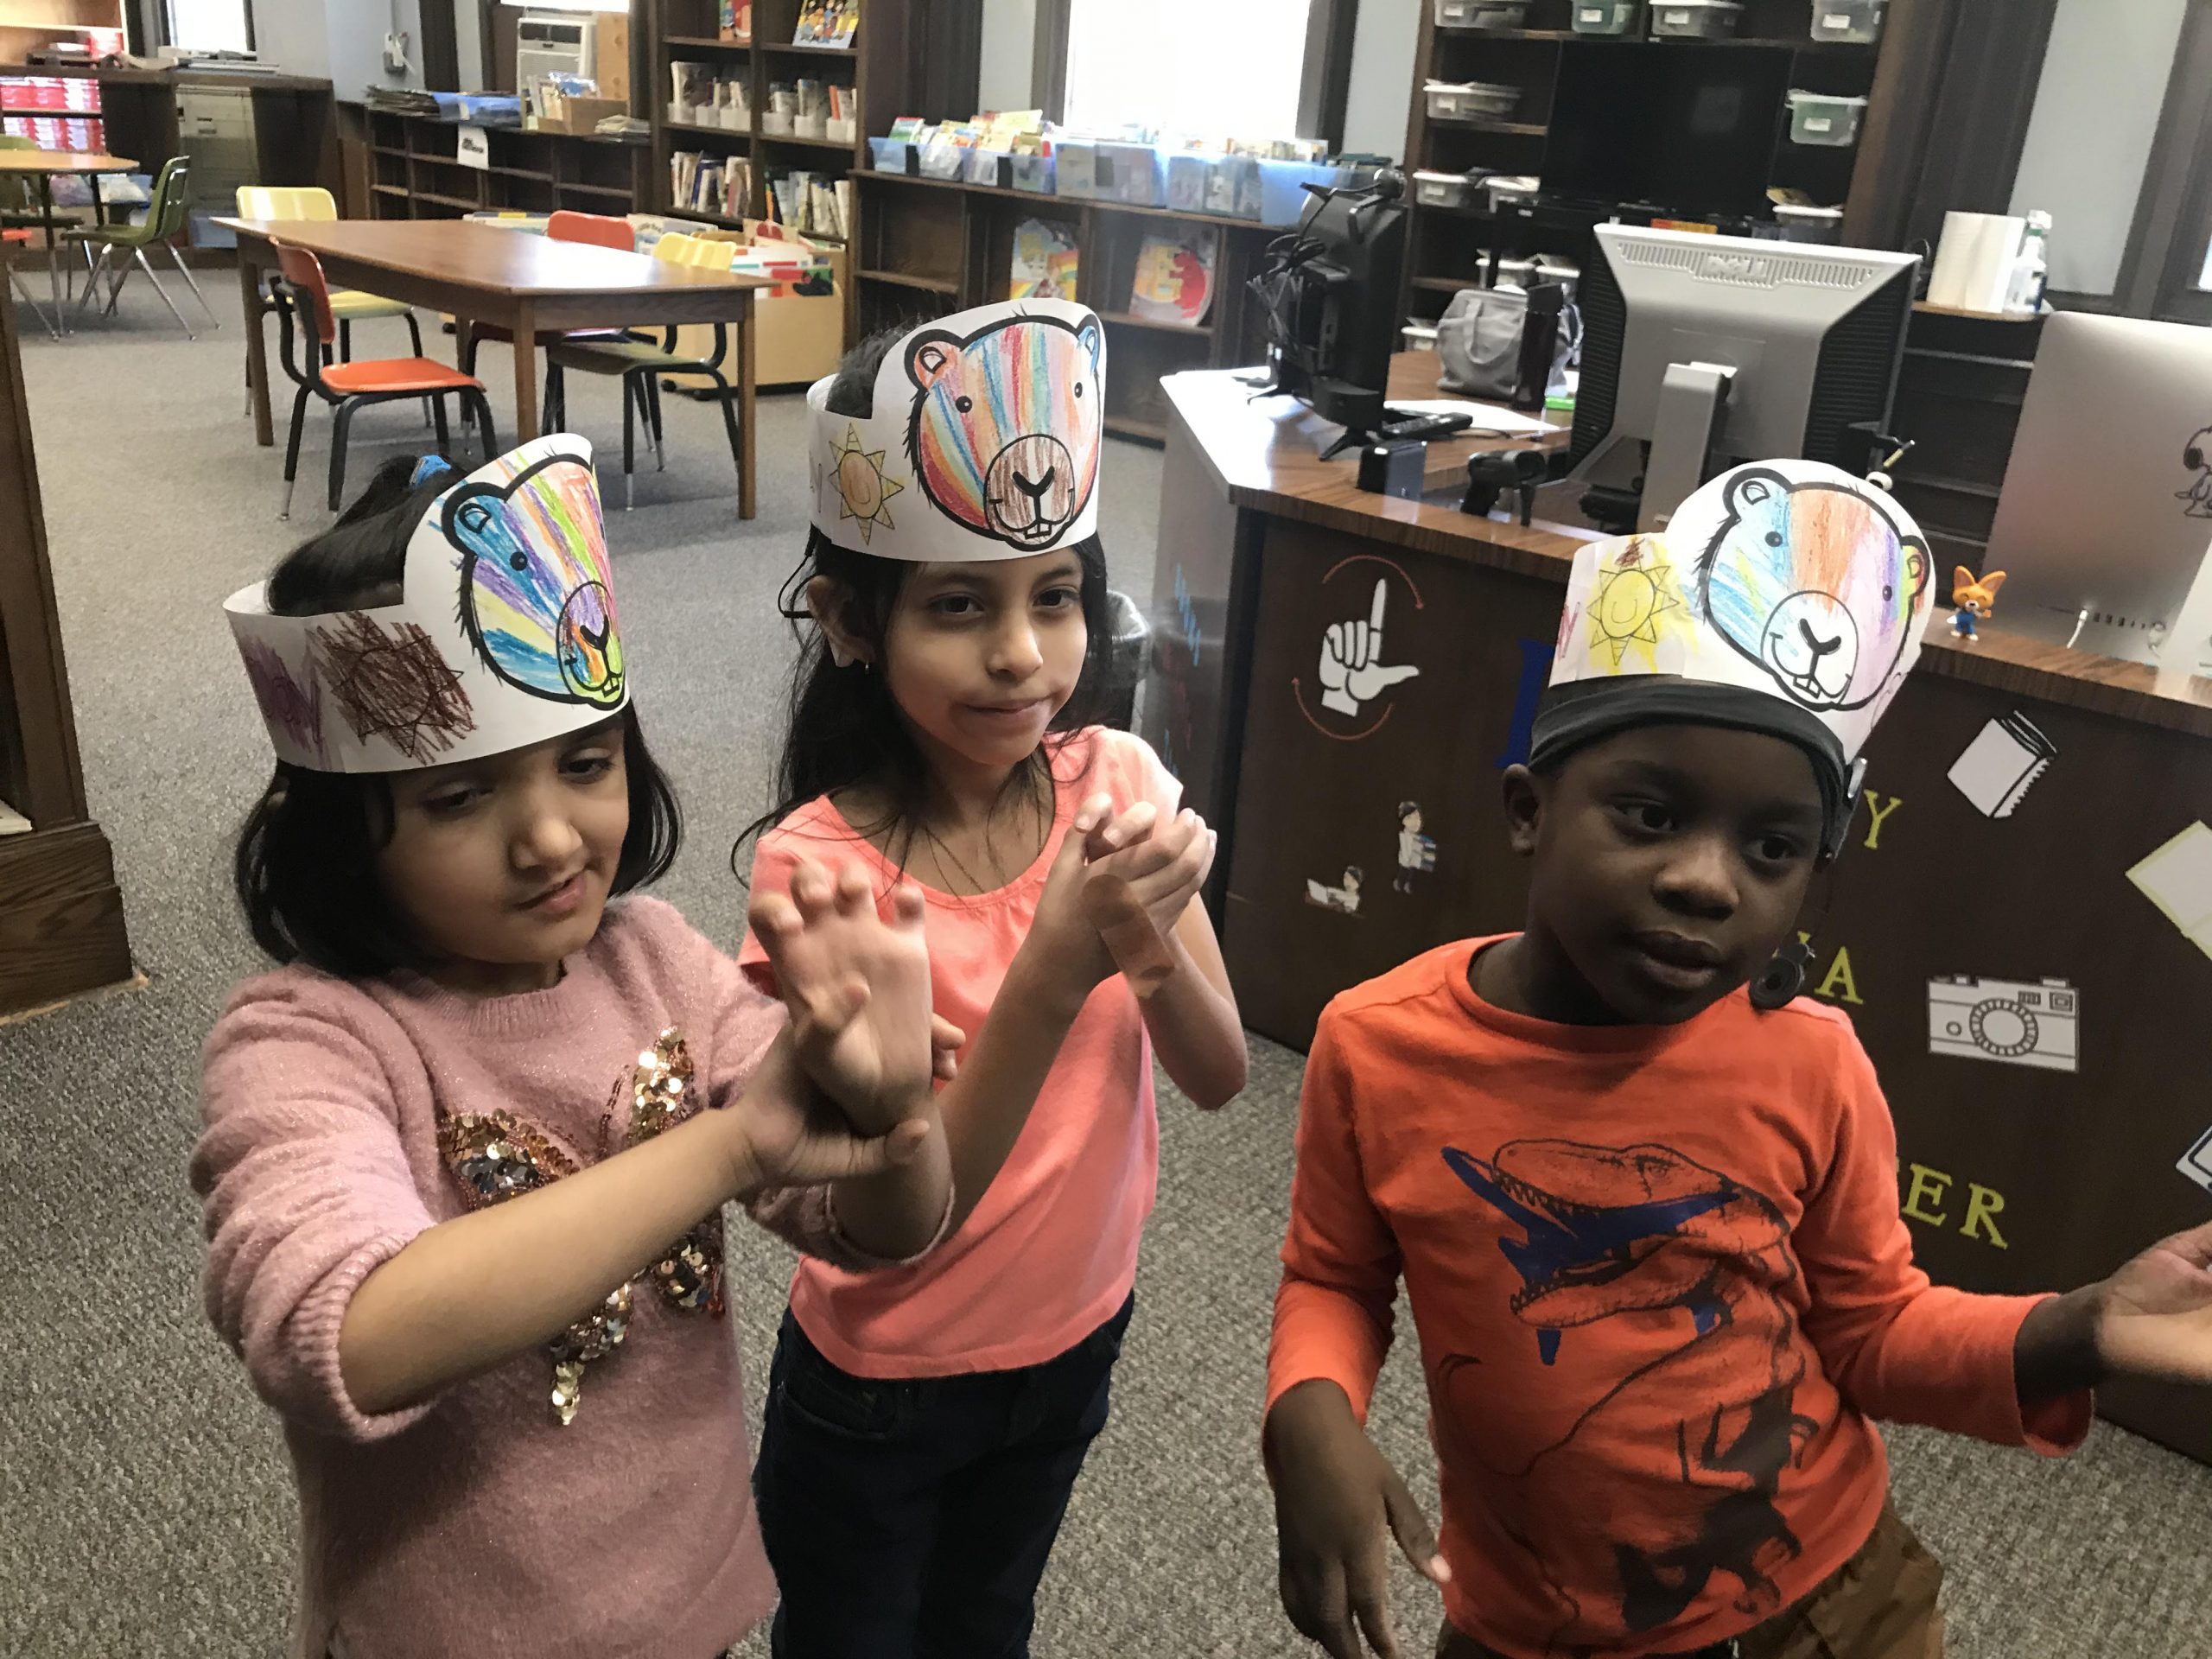 Three preschool students (2 girls and 1 boy) wearing Groundhogs Day paper crowns on their heads are in the library. They are all signing at the same time.